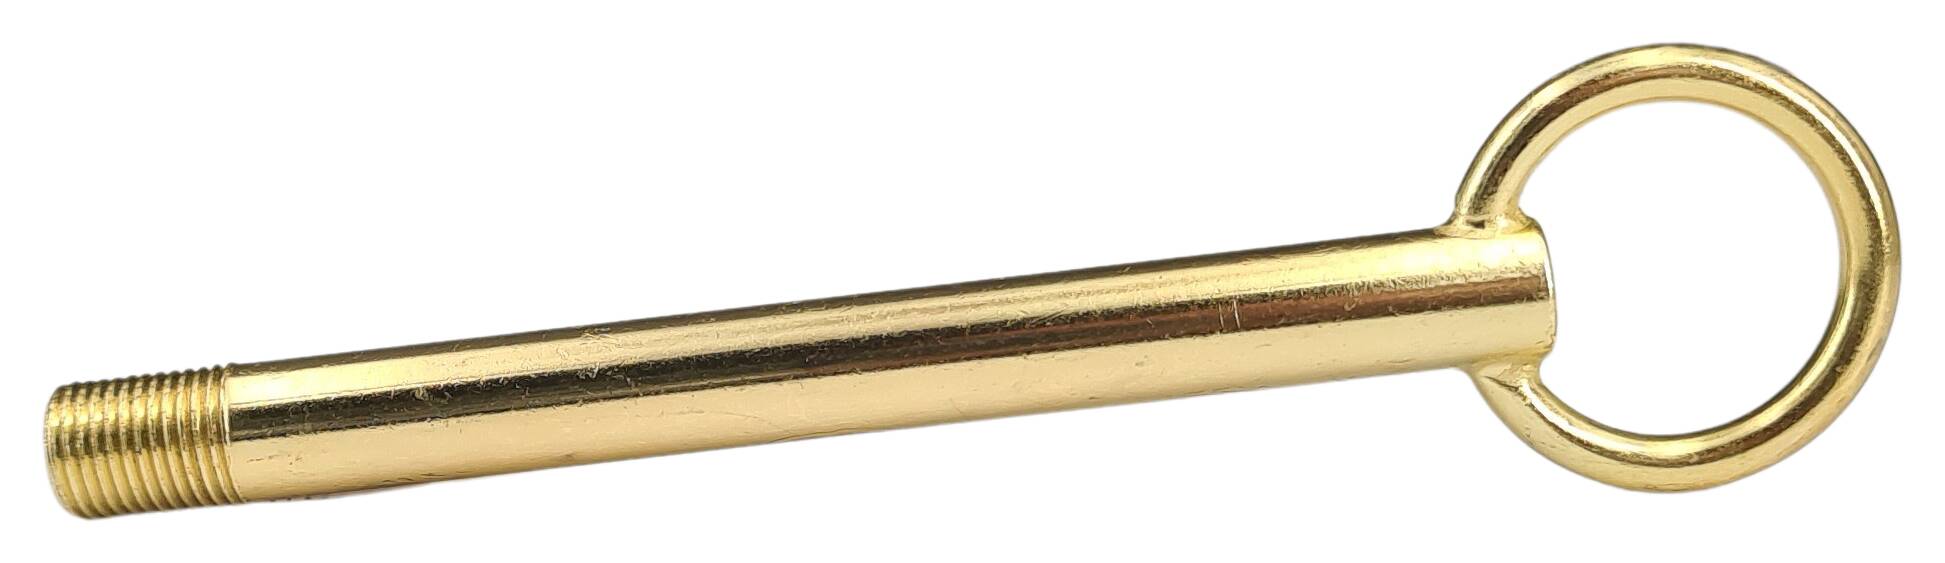 tube with ring dimension 30x125 soldered (stable design) (pol./laq.) glossy-brass-plated + lacquer